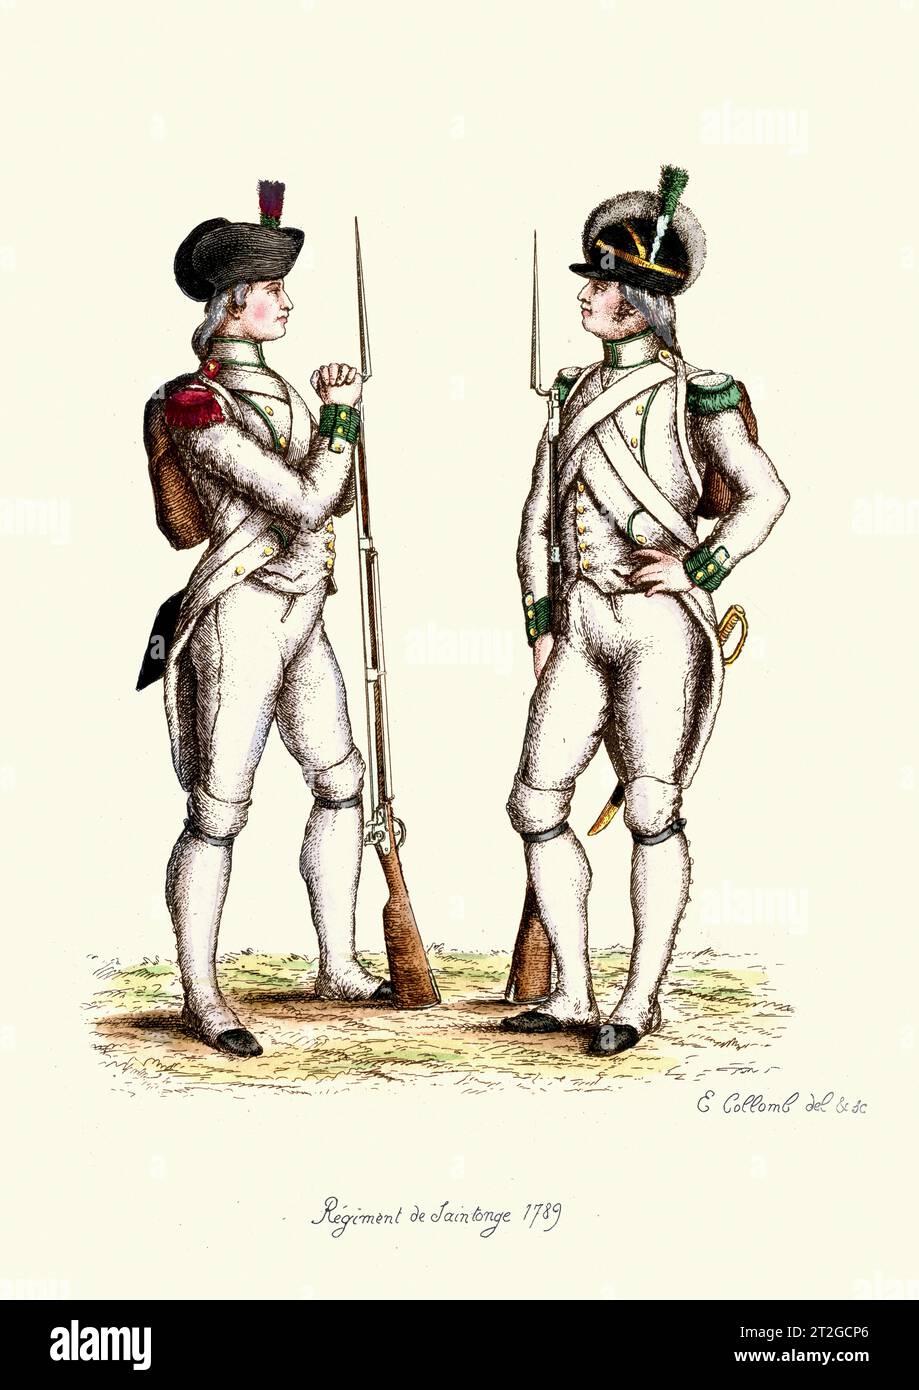 French Military Uniforms, 18th Century, History, Infantry solider, Musket and bayonet, Regiment de Saintonge Stock Photo